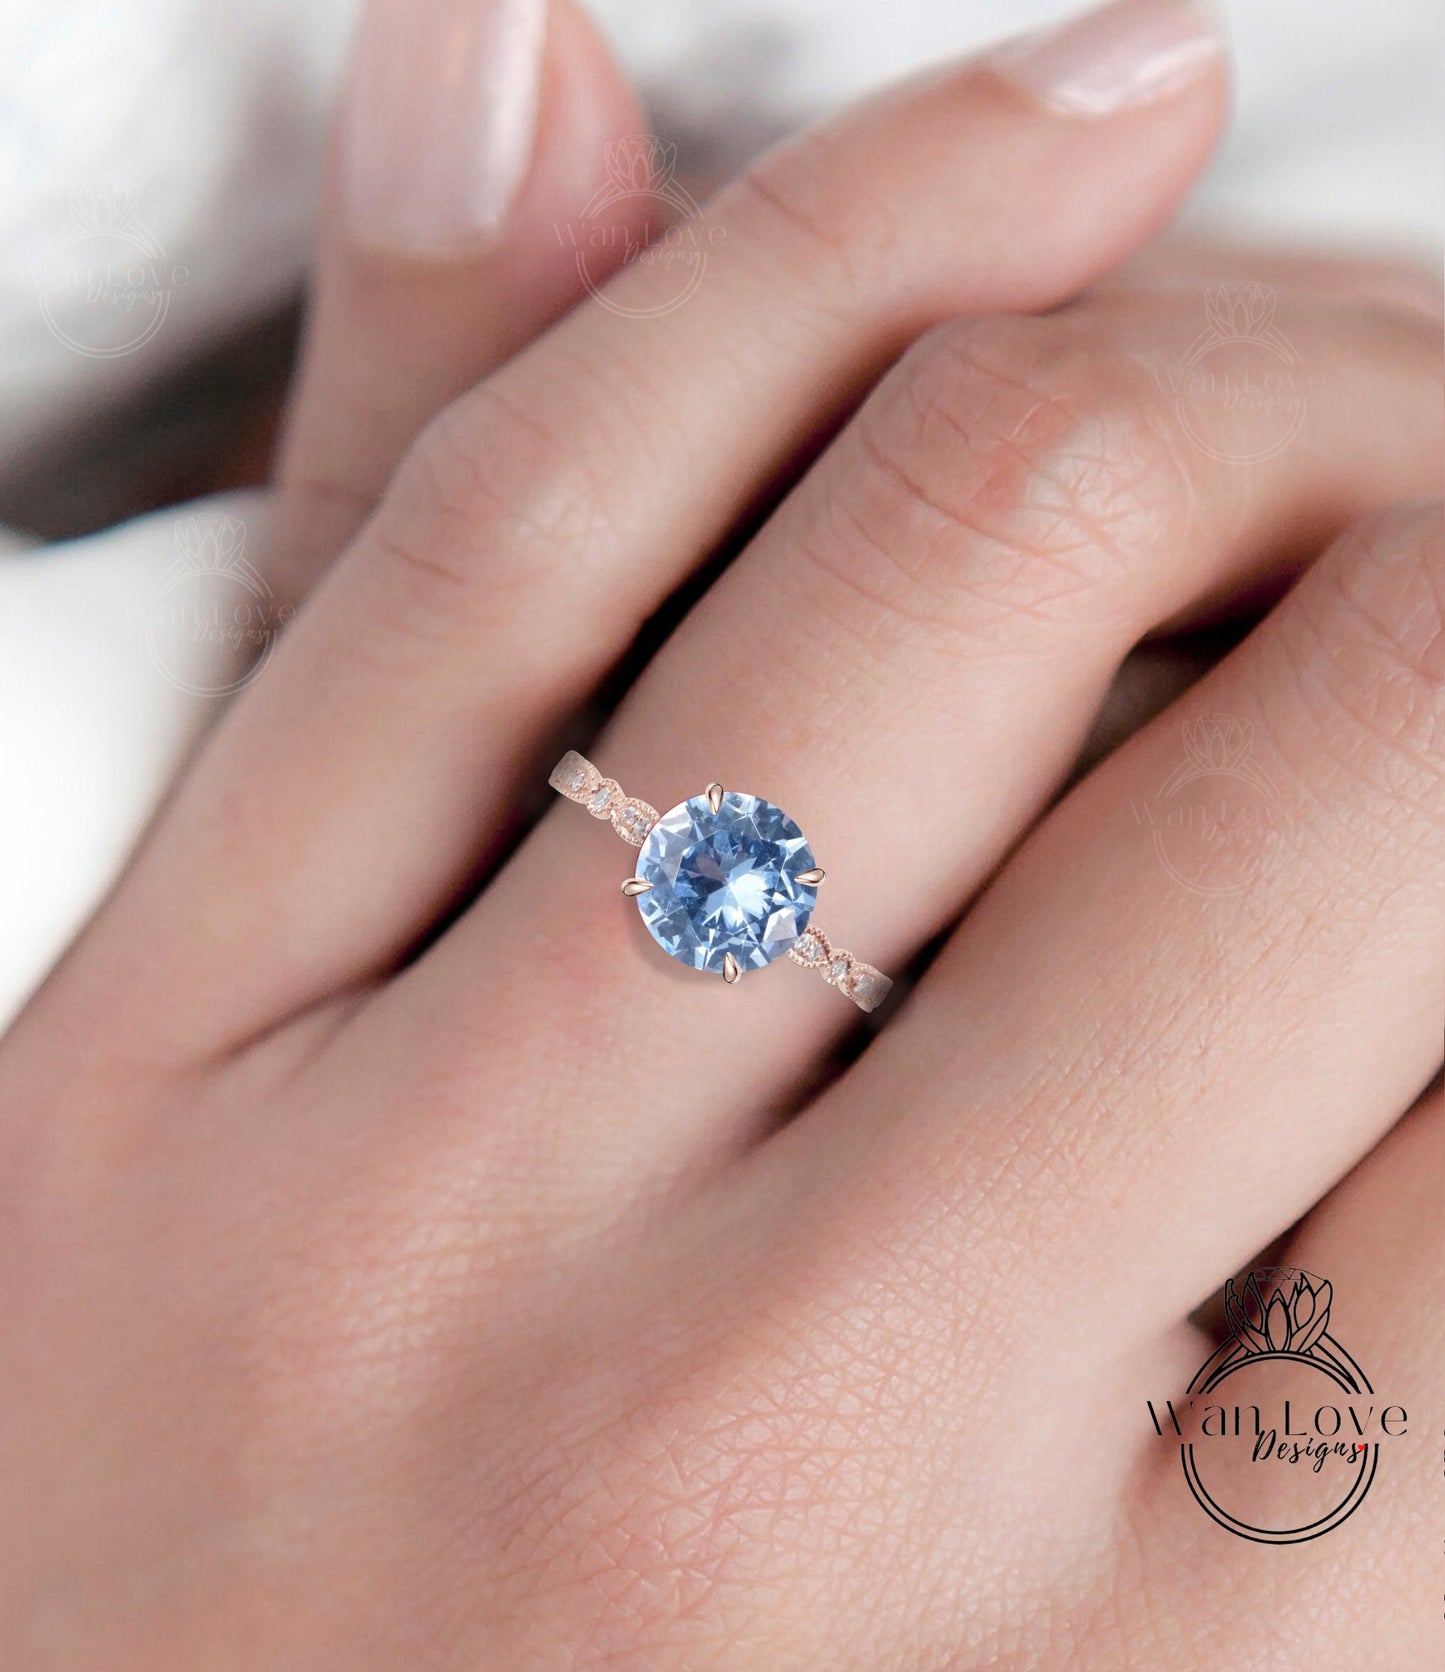 Aquamarine Blue Spinel Round & Diamond Art Deco Vintage Pave WITH or WITHOUT Milgrain Engagement Wedding Ring, 14k 18k Solid Rose White Gold Wan Love Designs